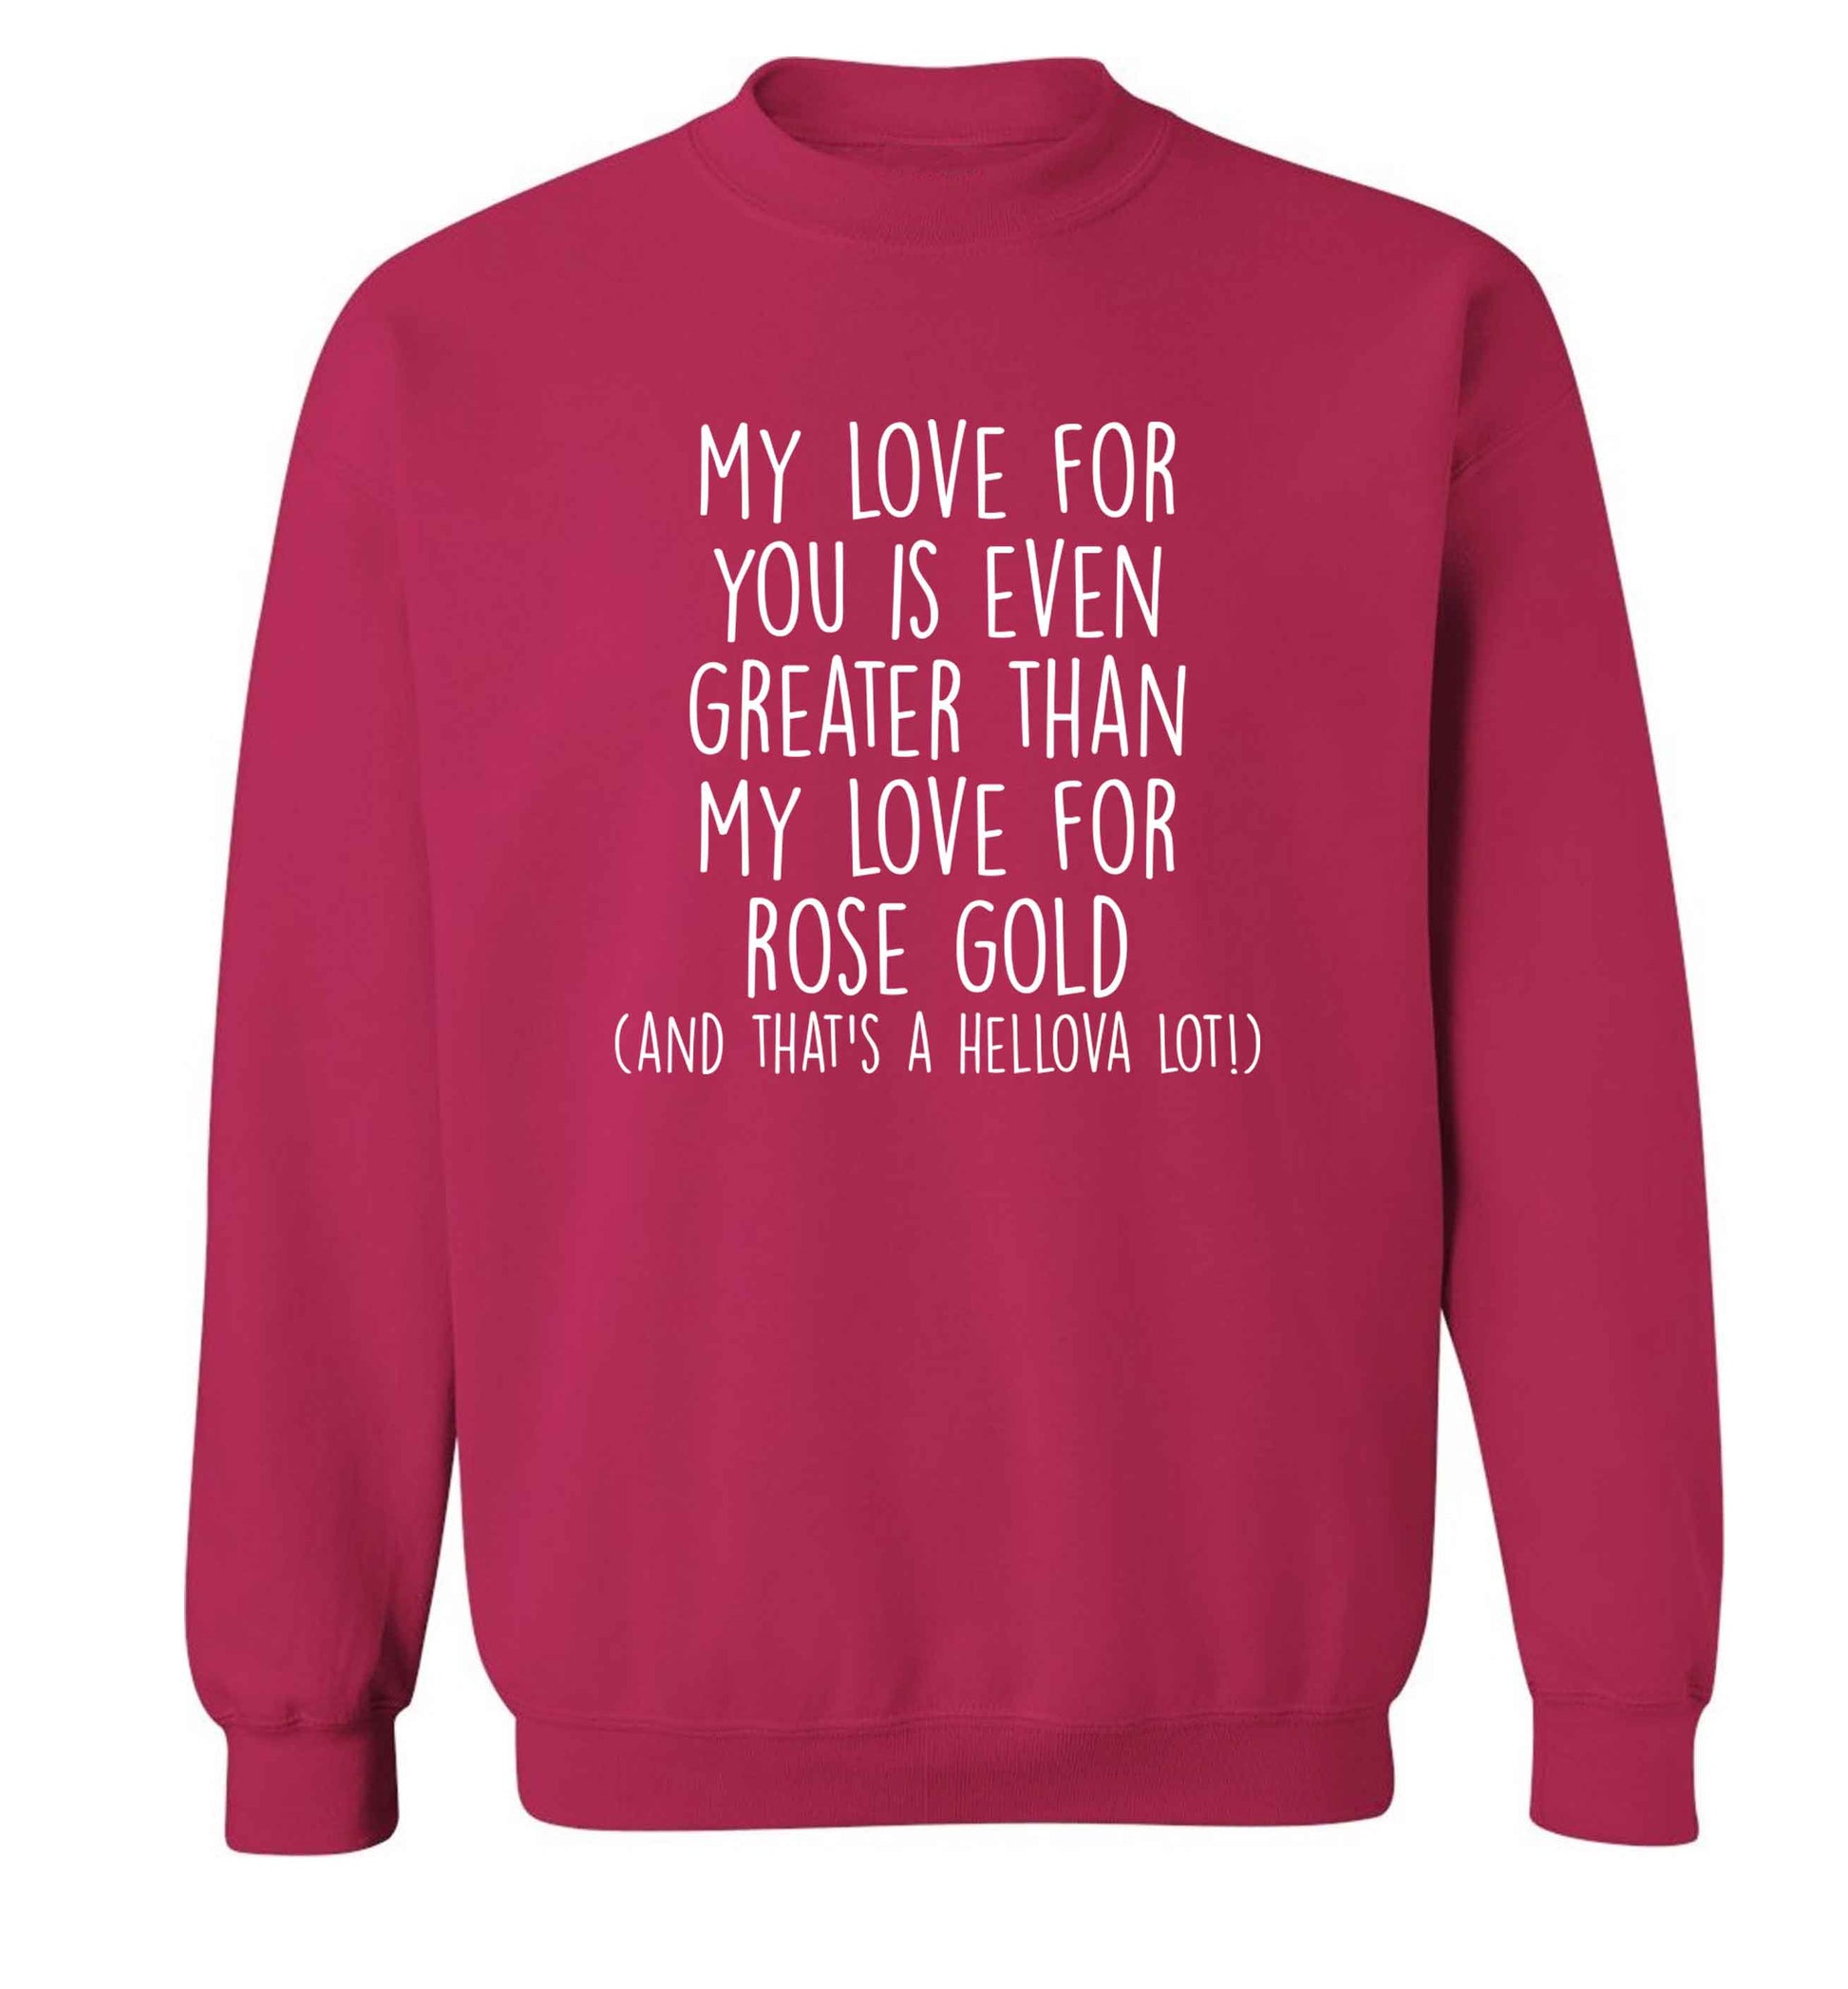 My love for you is even greater than my love for rose gold (and that's a hellova lot) adult's unisex pink sweater 2XL